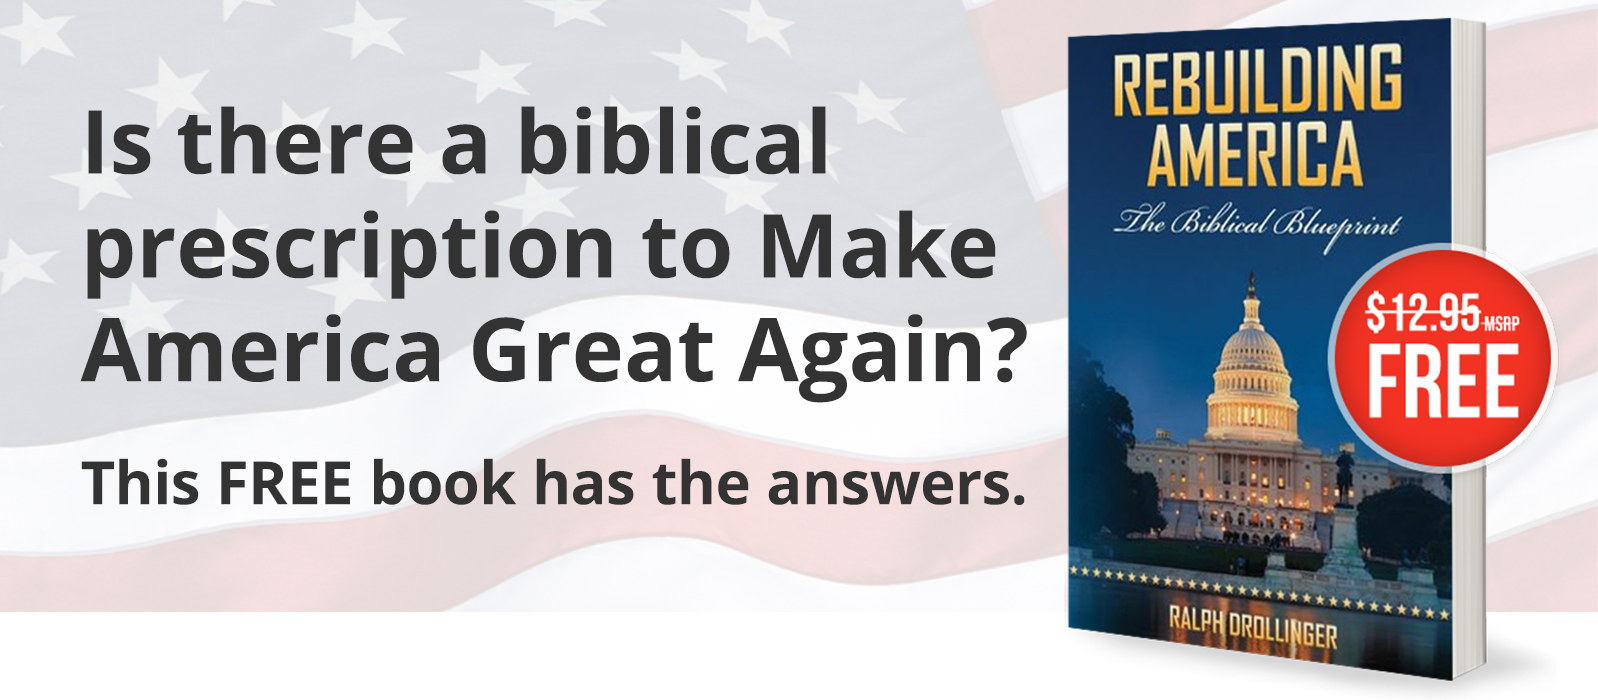 Is there a biblical prescription to Make America Great Again? This FREE book has the answers.